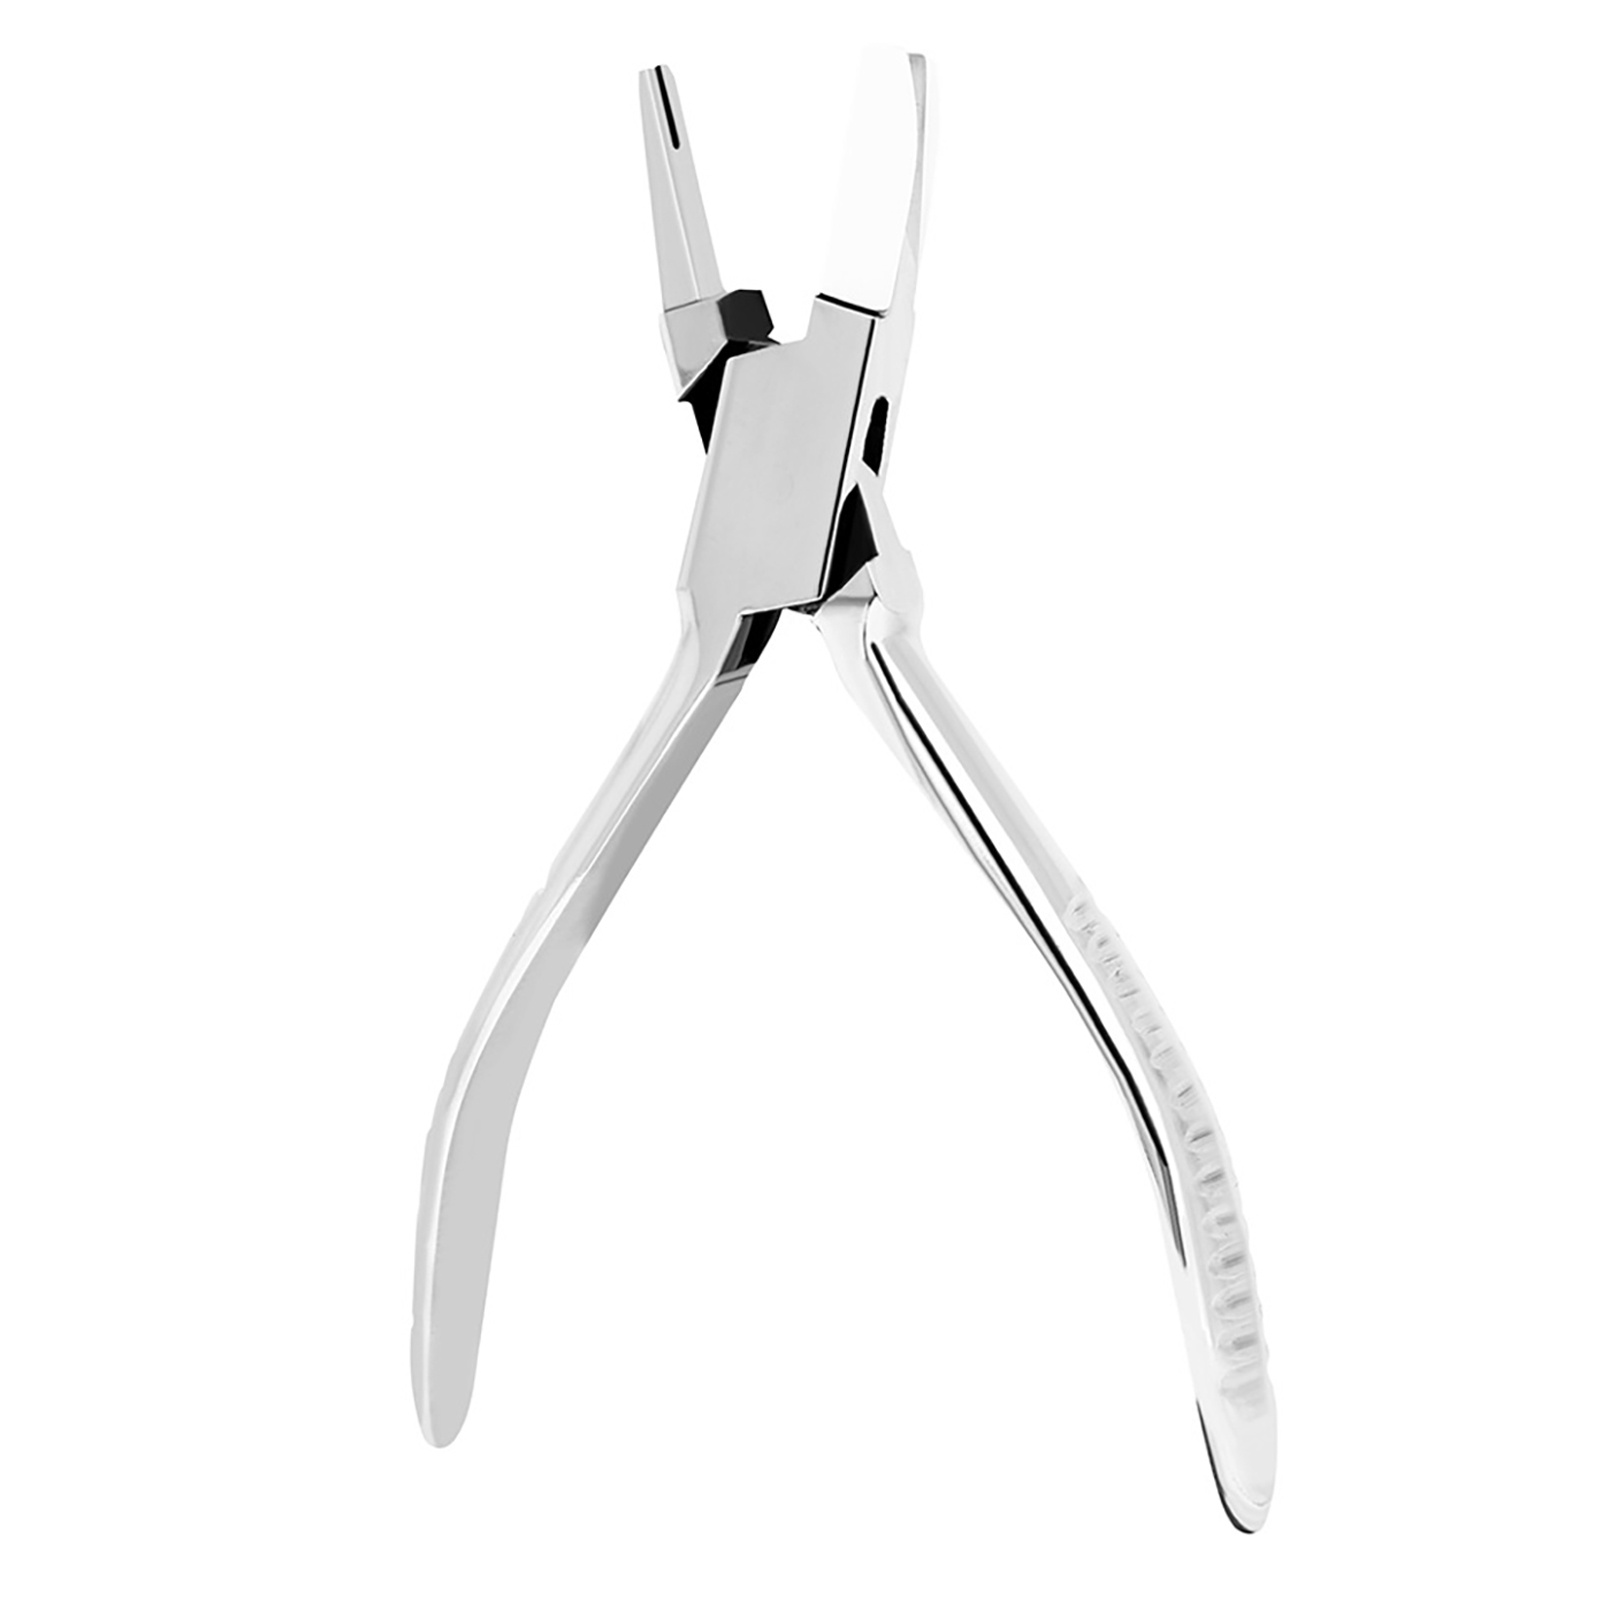 Repair Spring Tool Spring Removing Supplies Pliers 301 Stainless Steel Orchestral Instrument Repair Tools silver